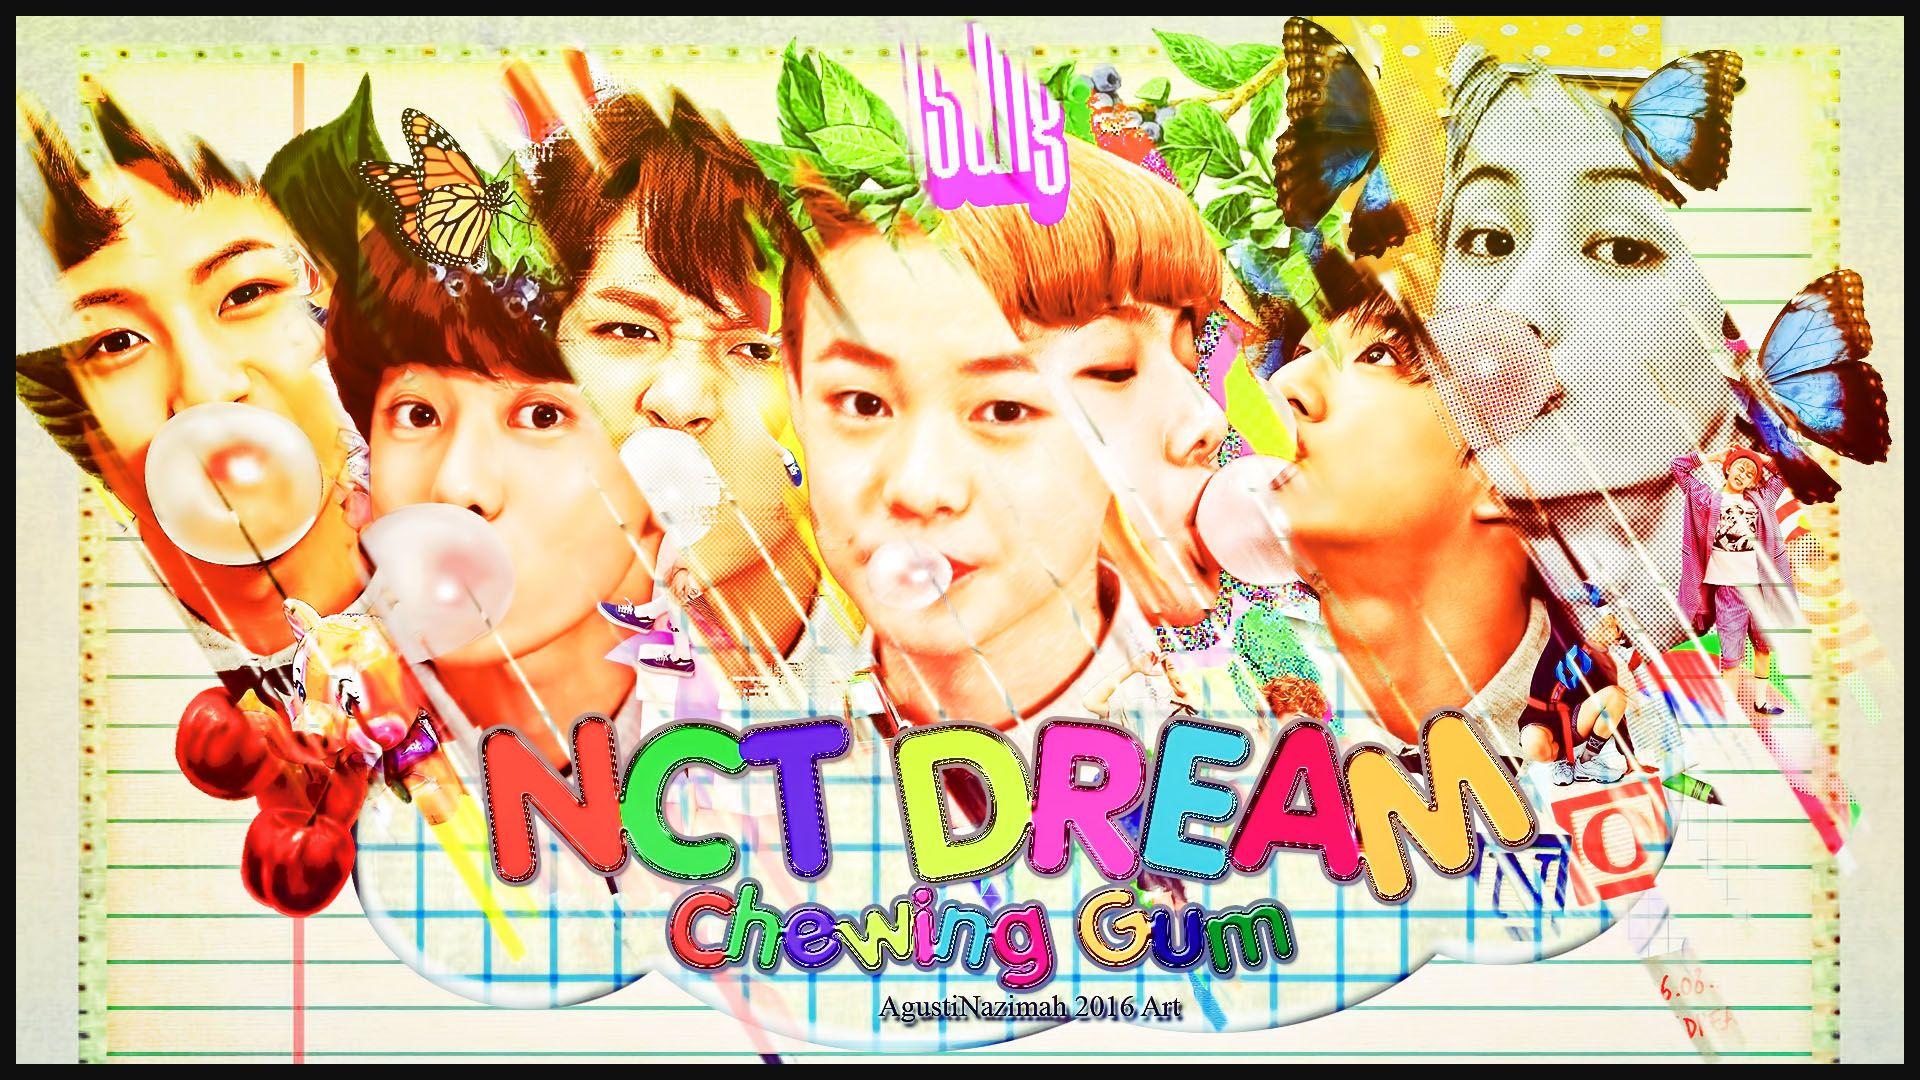 Artwork NCT Dream For Chewing Gum. ♥ AgustiNazimah Experience ♥